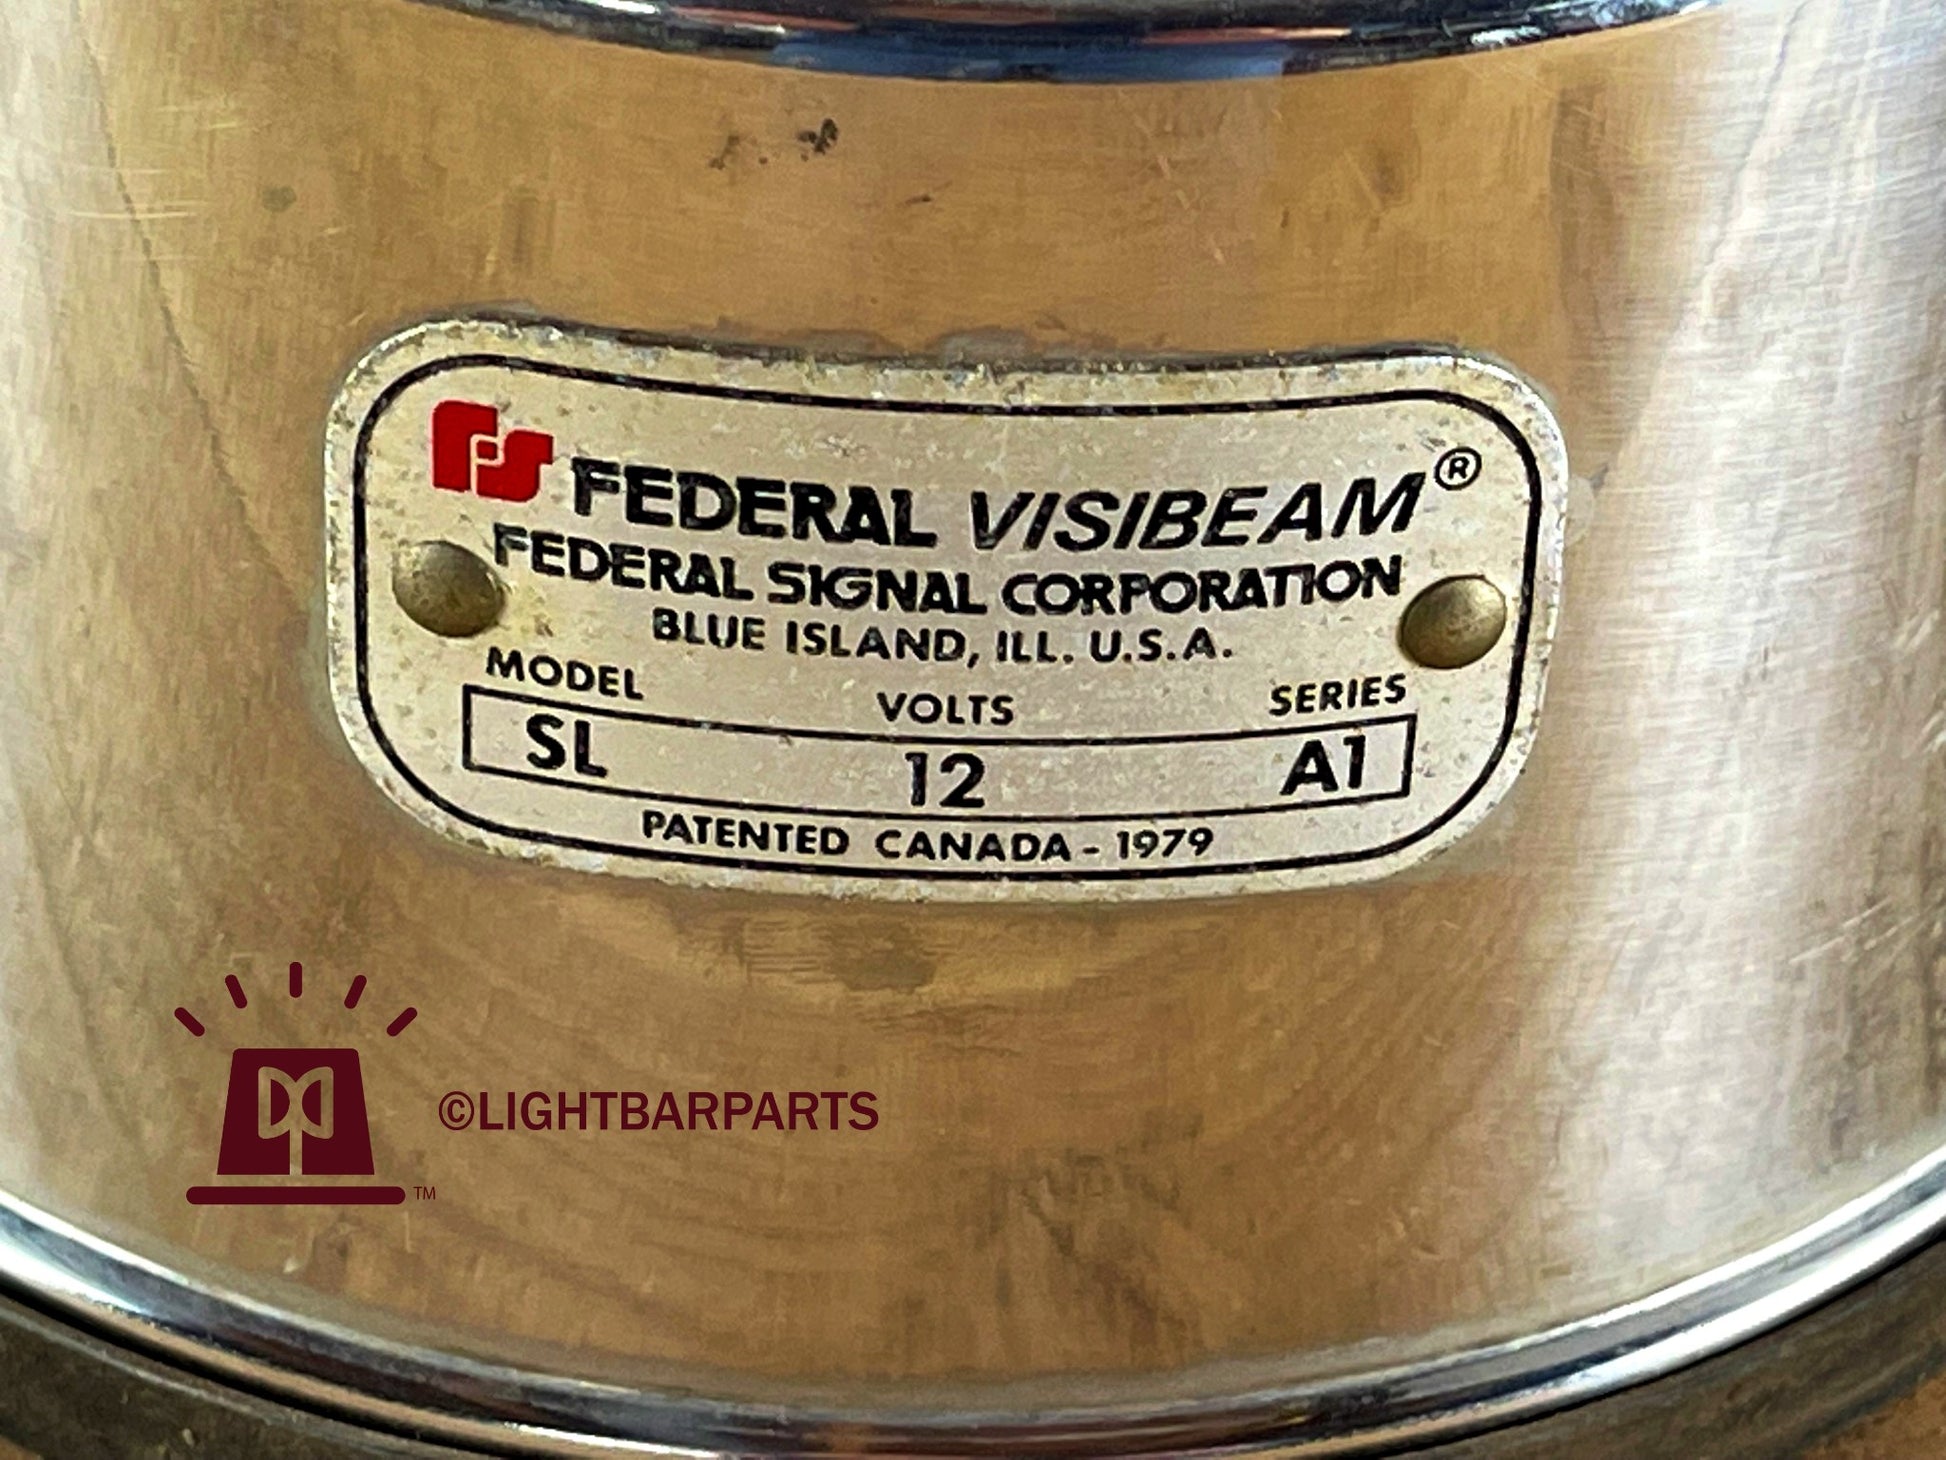 Federal Signal Visibeam Model SL A1 - Stainless Base with Rubber Seals